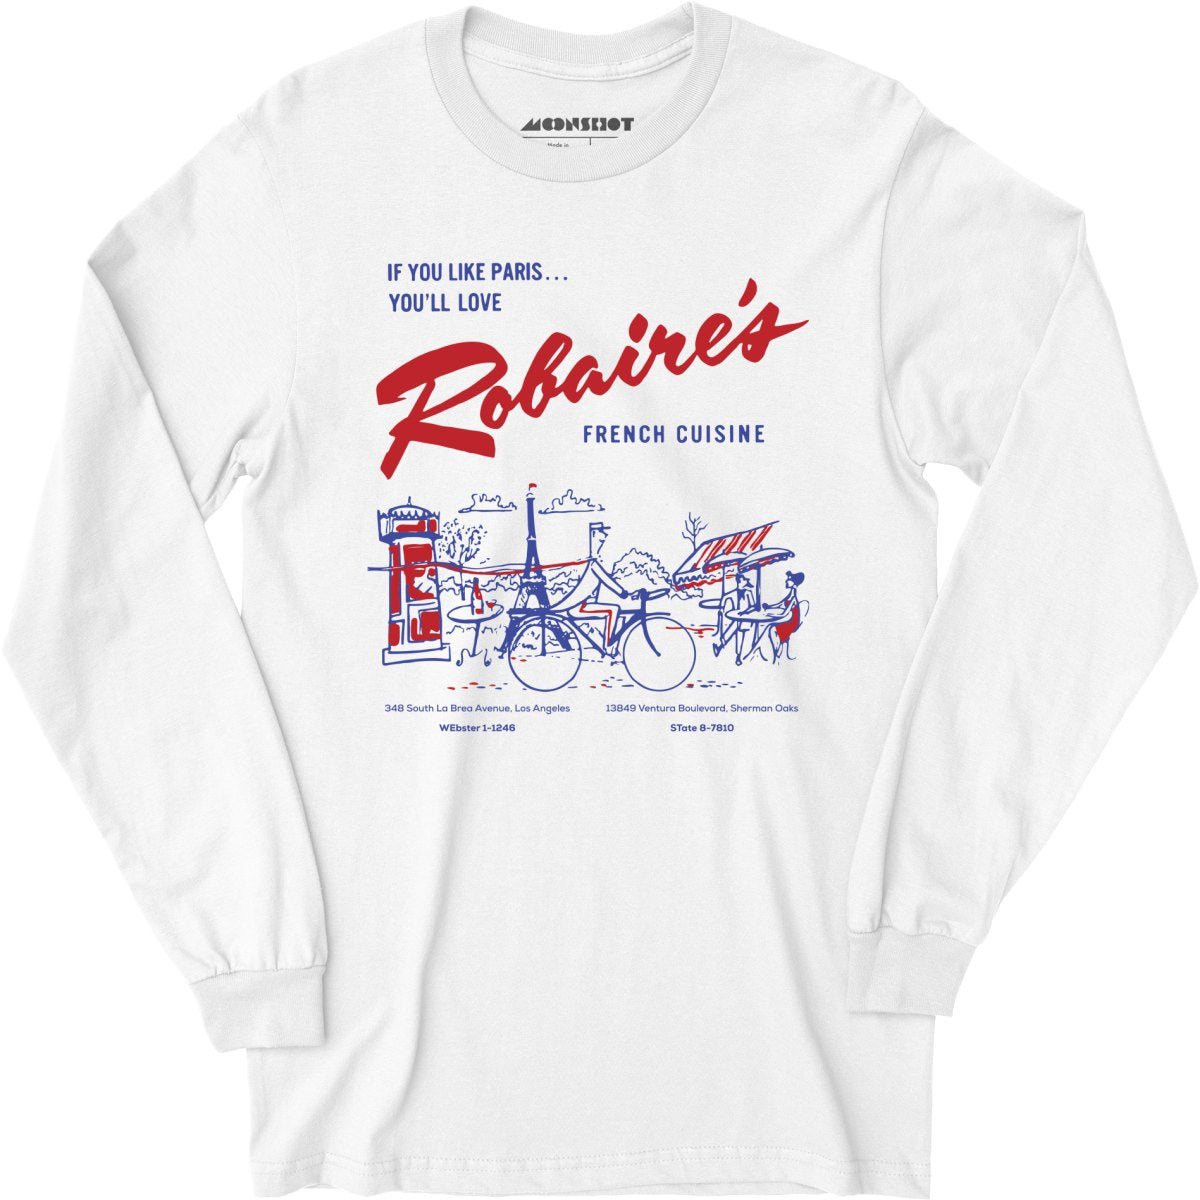 Robaire's French Cuisine - Los Angeles, CA - Vintage Restaurant - Long Sleeve T-Shirt